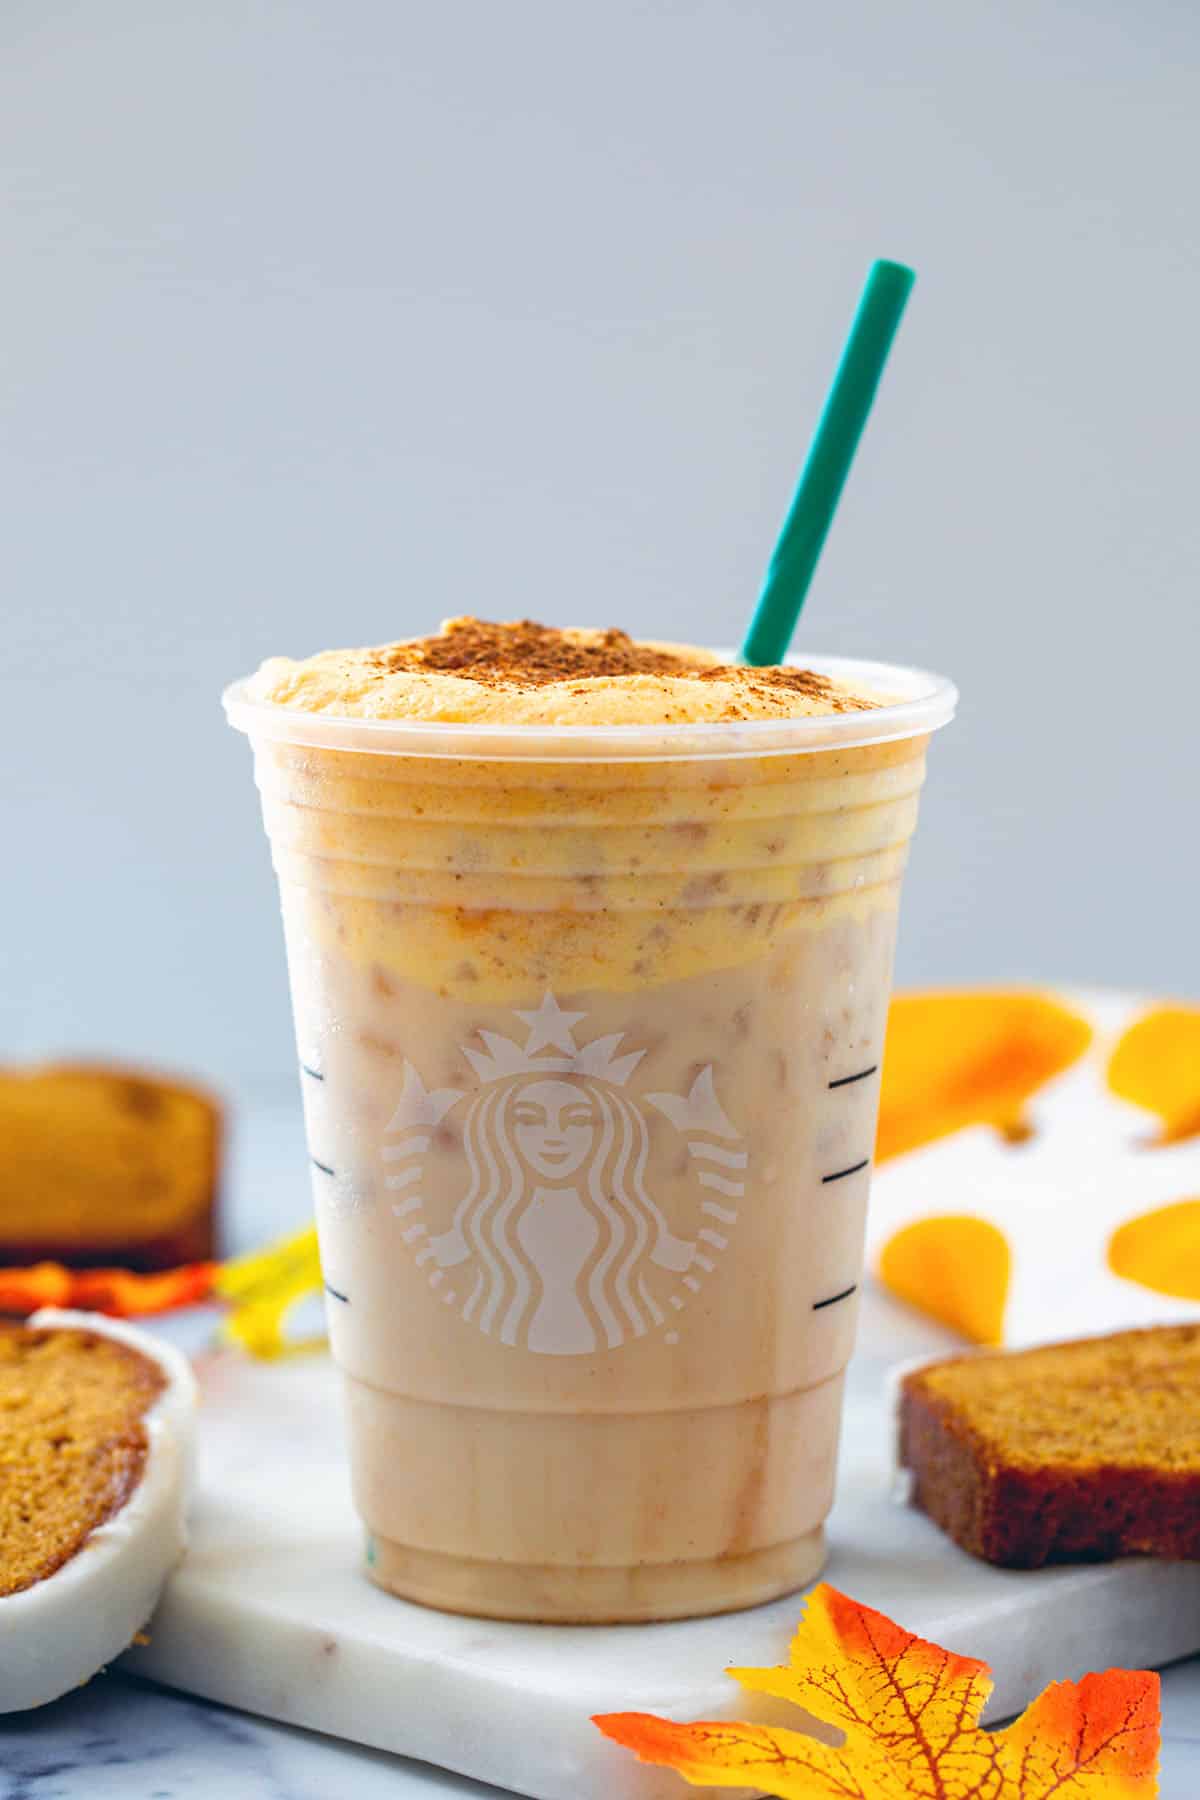 Head-on view of iced pumpkin cream chai tea latte with green straw with pumpkin bread all around.